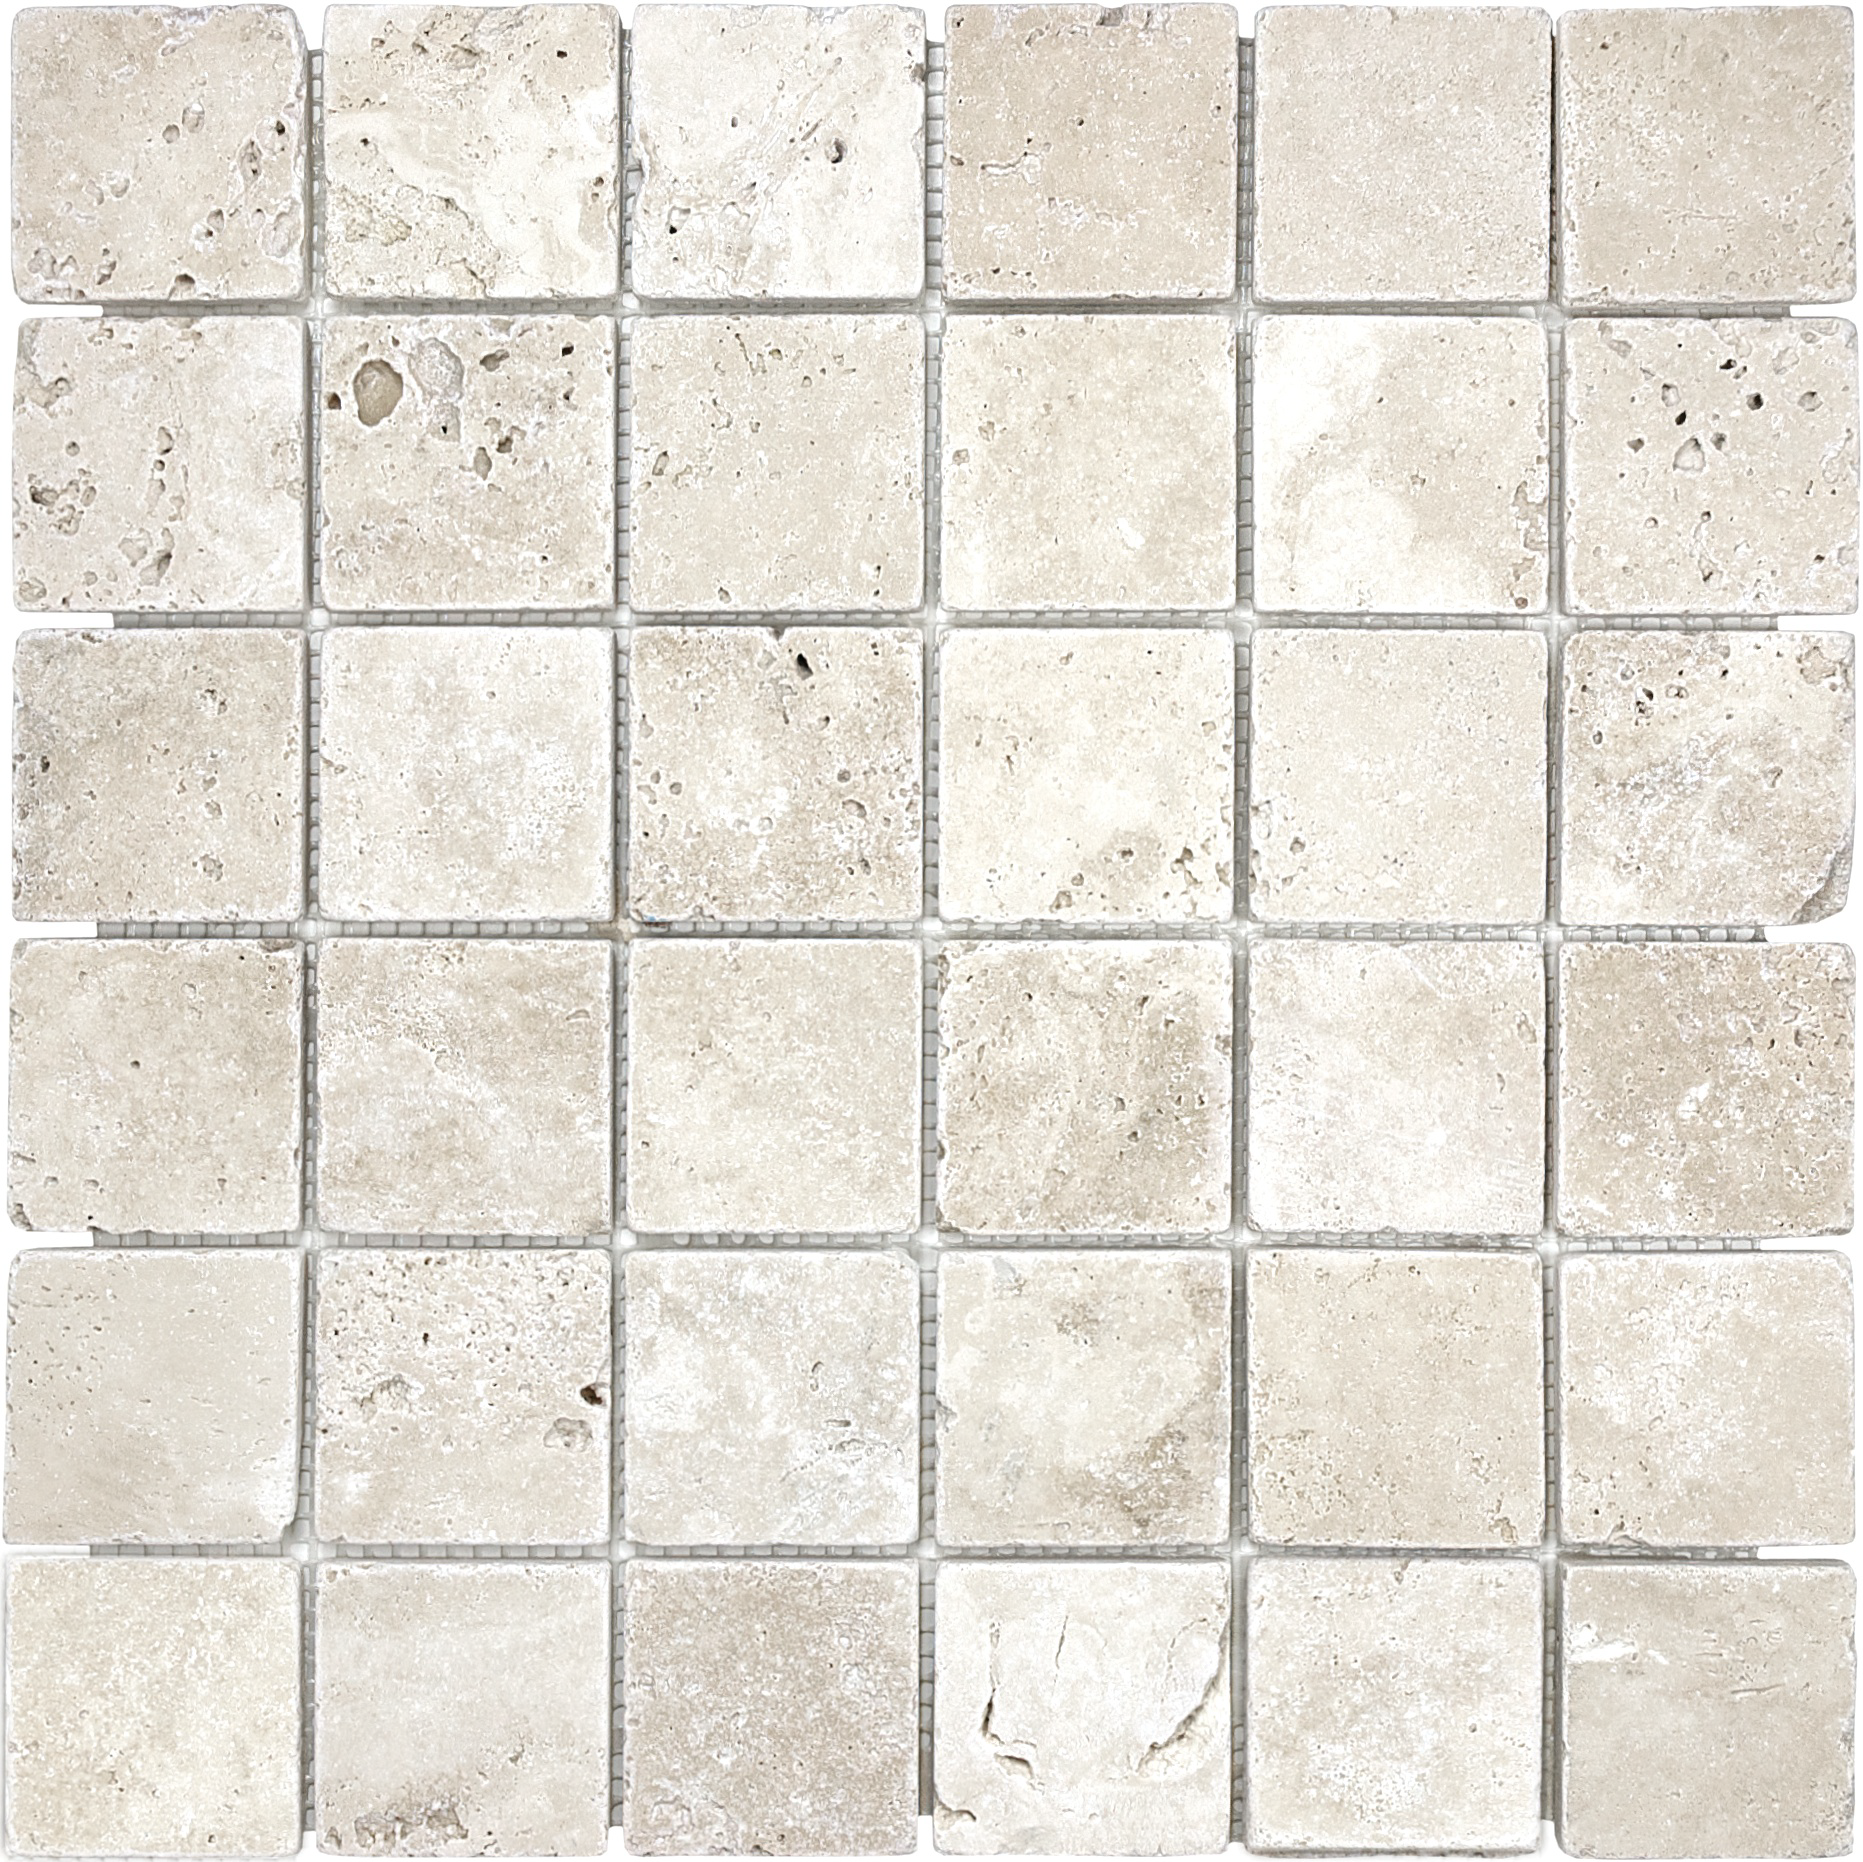 travertine straight stack 2x2-inch pattern natural stone mosaic from ivory anatolia collection distributed by surface group international tumbled finish tumbled edge mesh shape